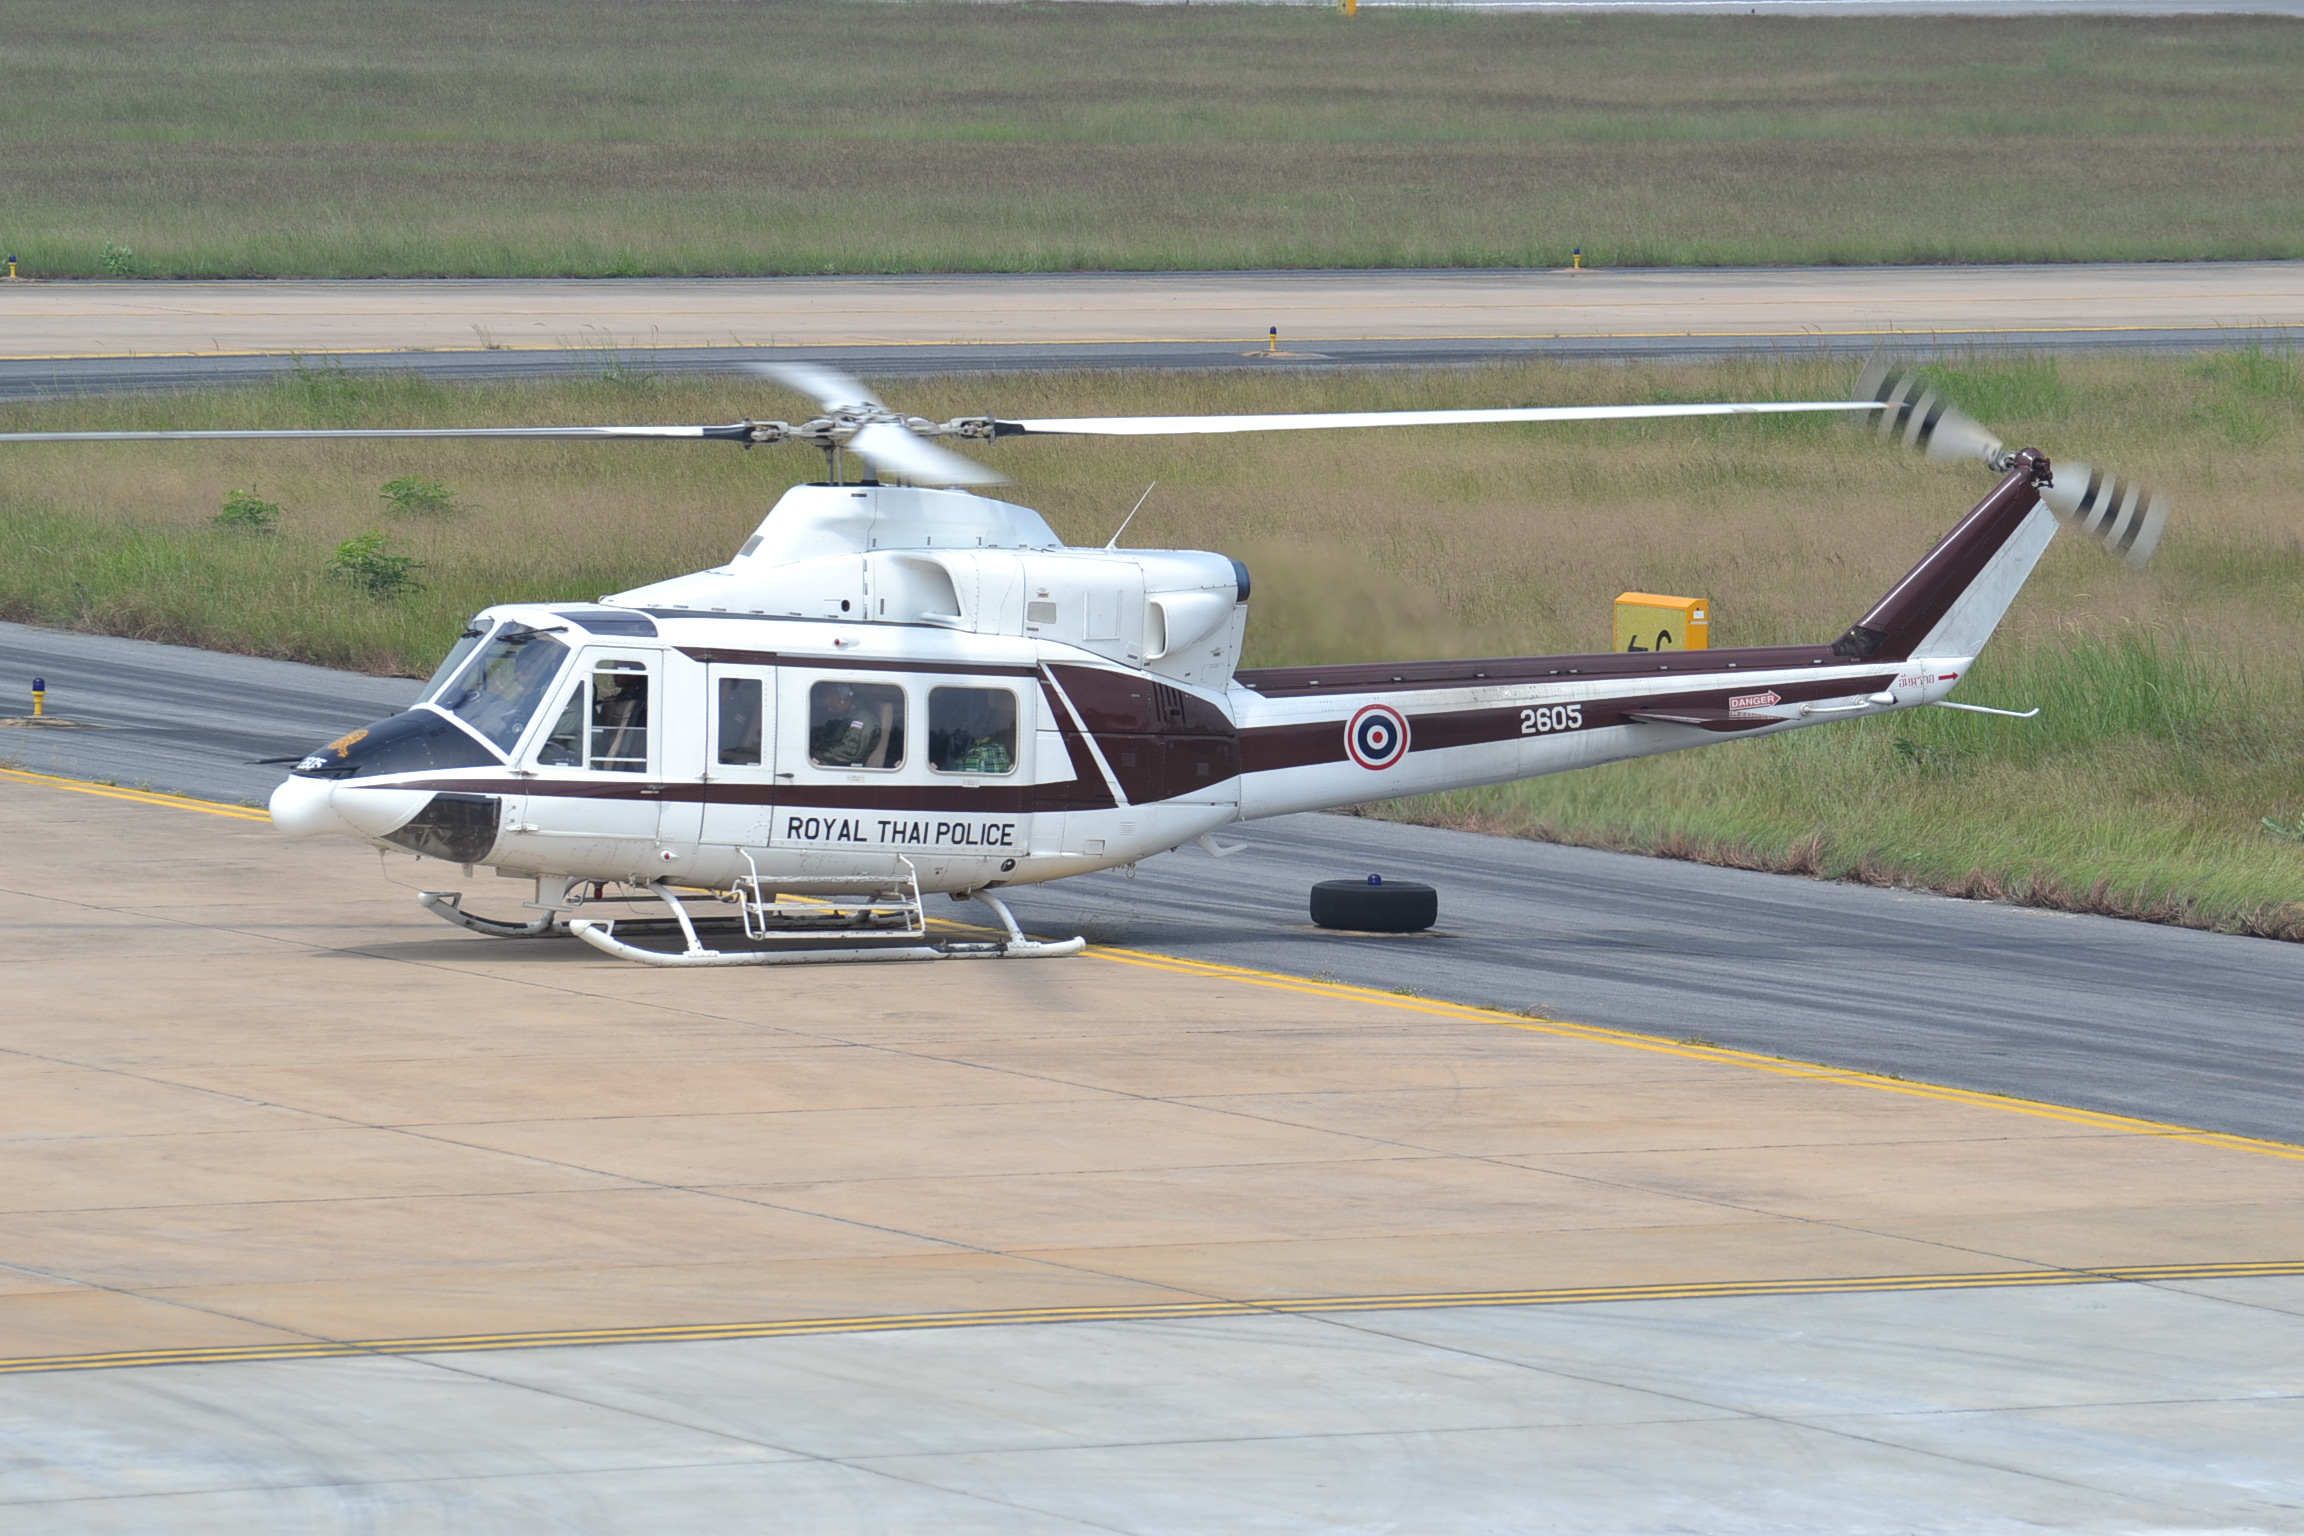 Bell_Helicopters_412EP_of_the_Royal_Thai_Police_at_Khon_Kaen-KKC_(10489786265).jpg